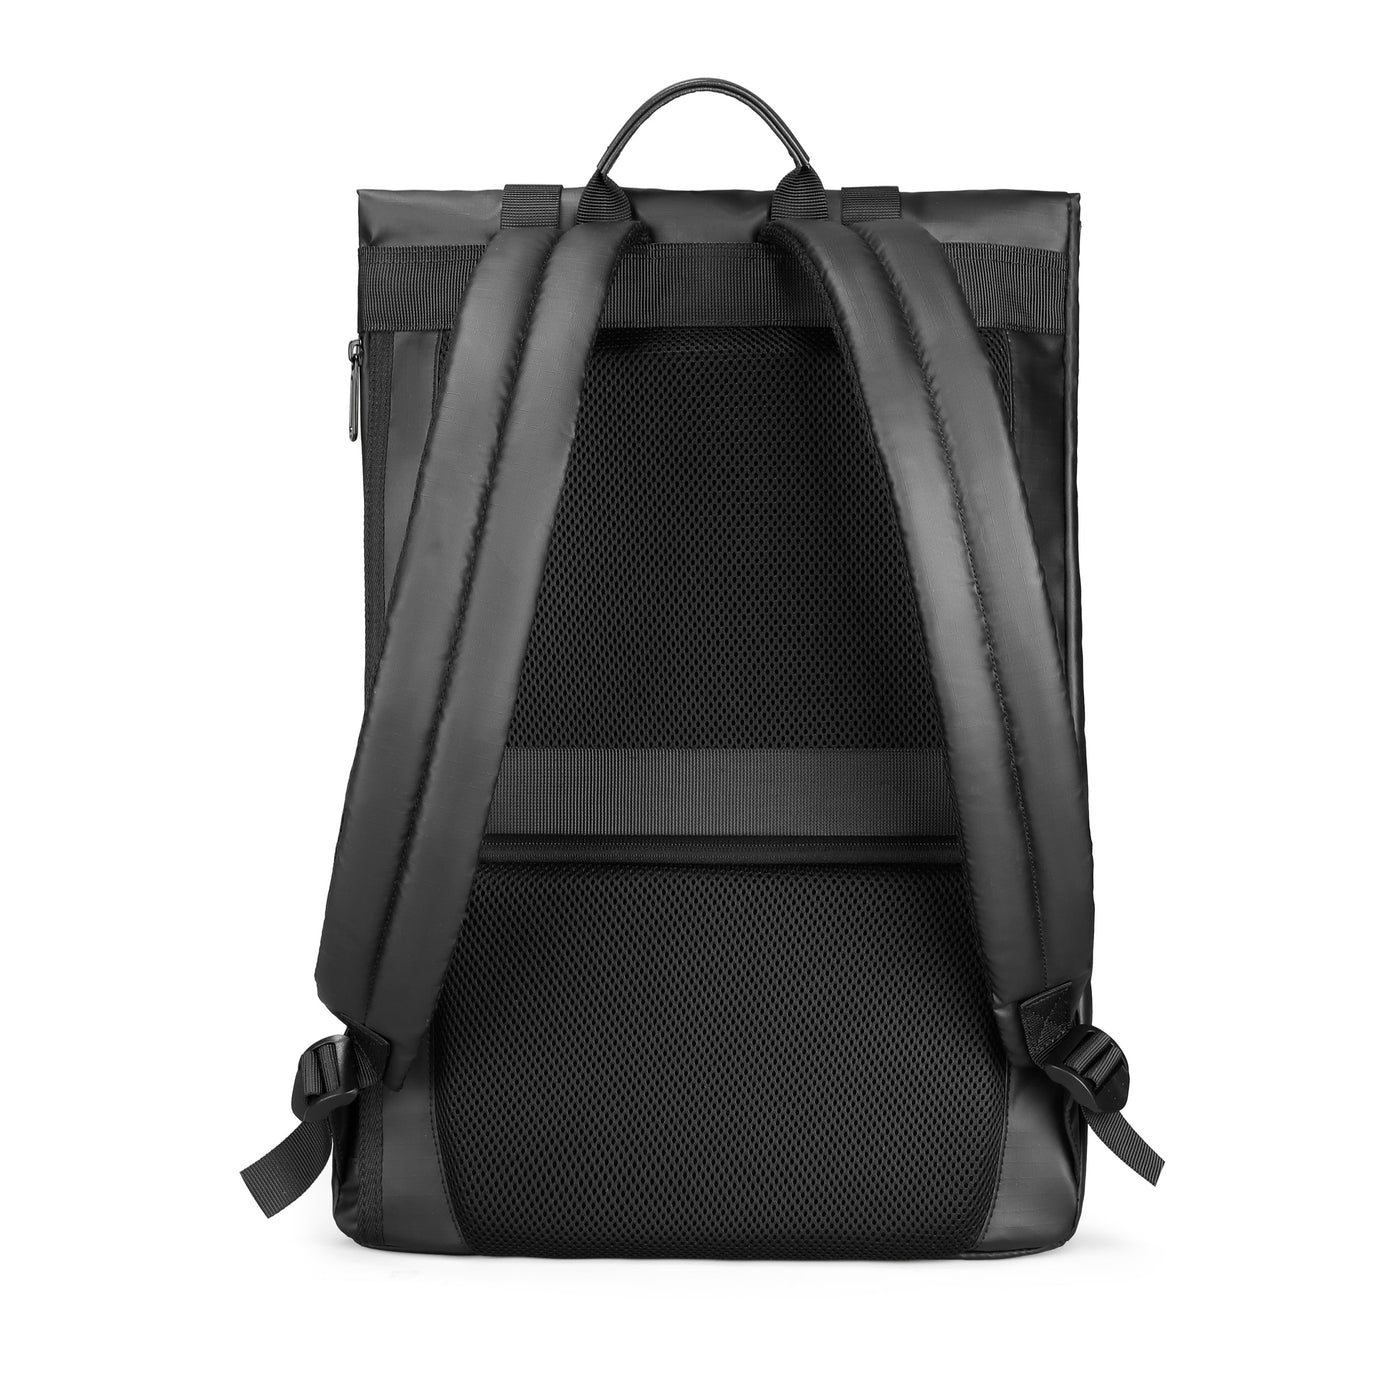 Mark Ryden Mani Casual commuter style laptop backpack